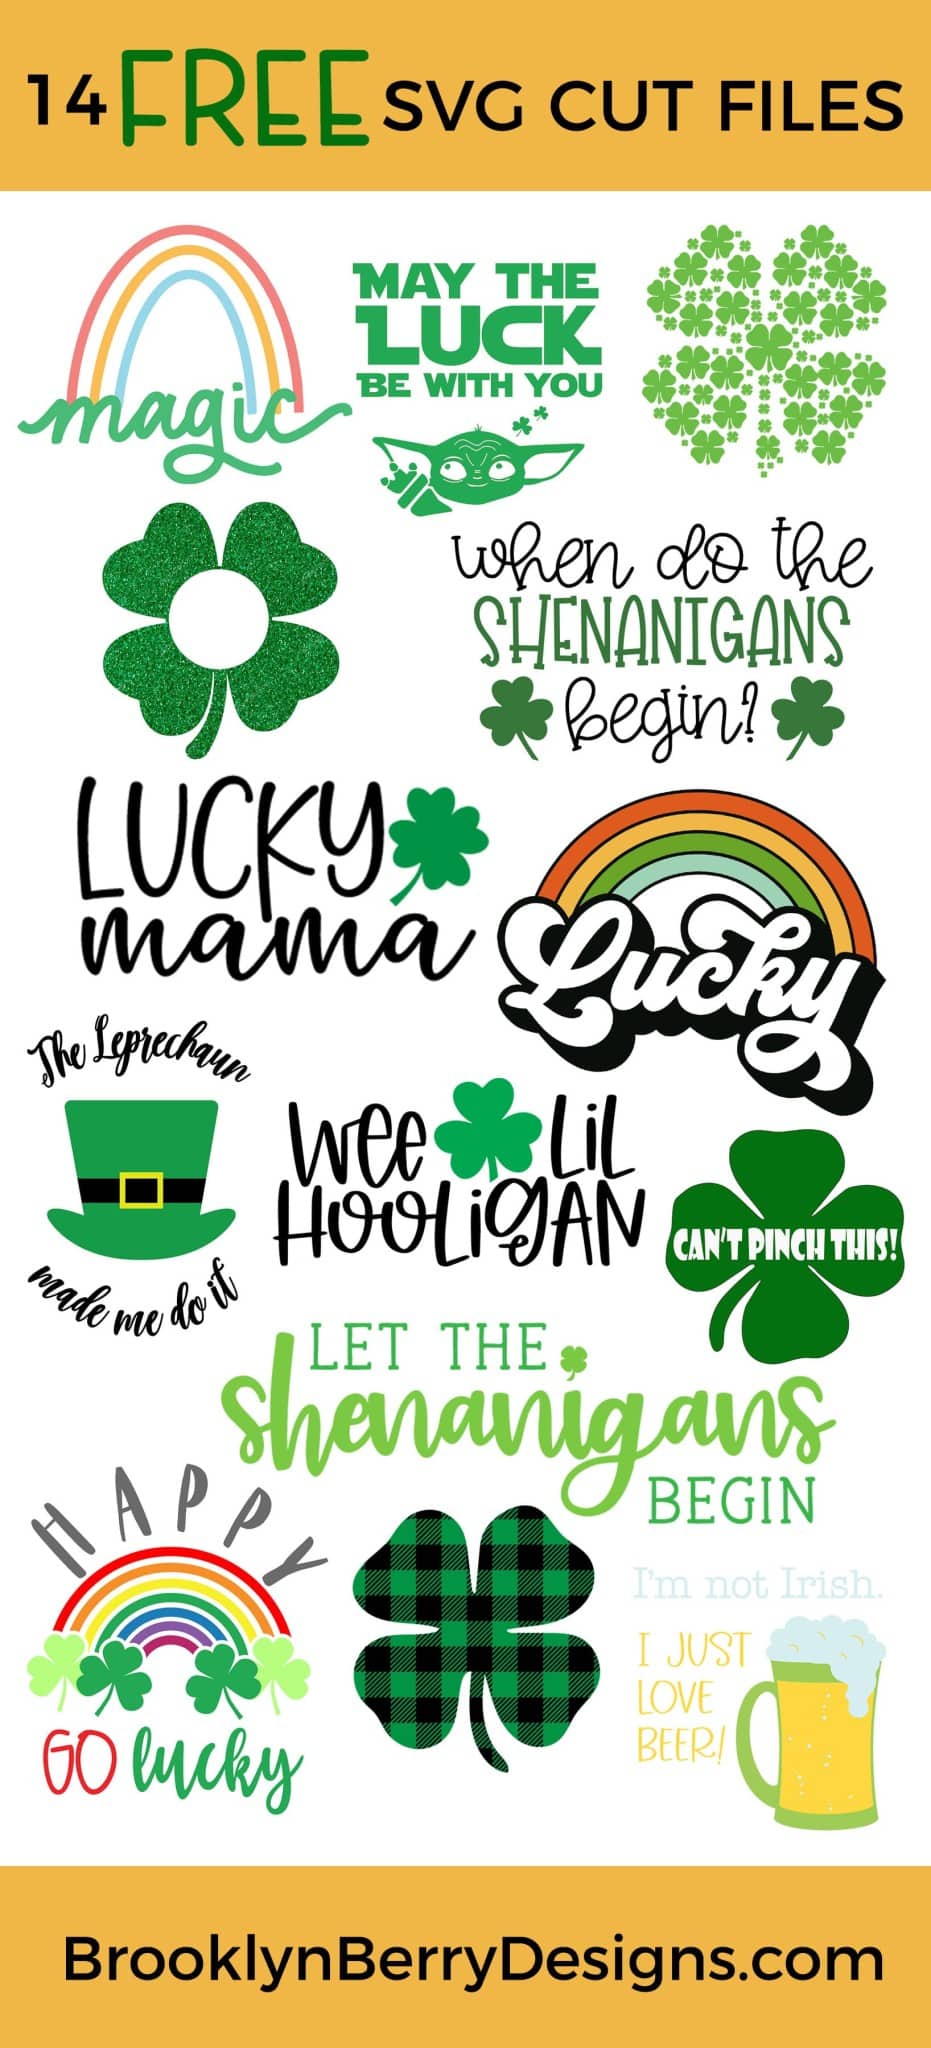 14 free St. Patrick's Day SVG files to get you in the shamrock spirit. No patterned vinyl needed with this two layered Buffalo Plaid Shamrock SVG! Get St Patricks Day ready and make your own shamrock shirt! via @brookeberry